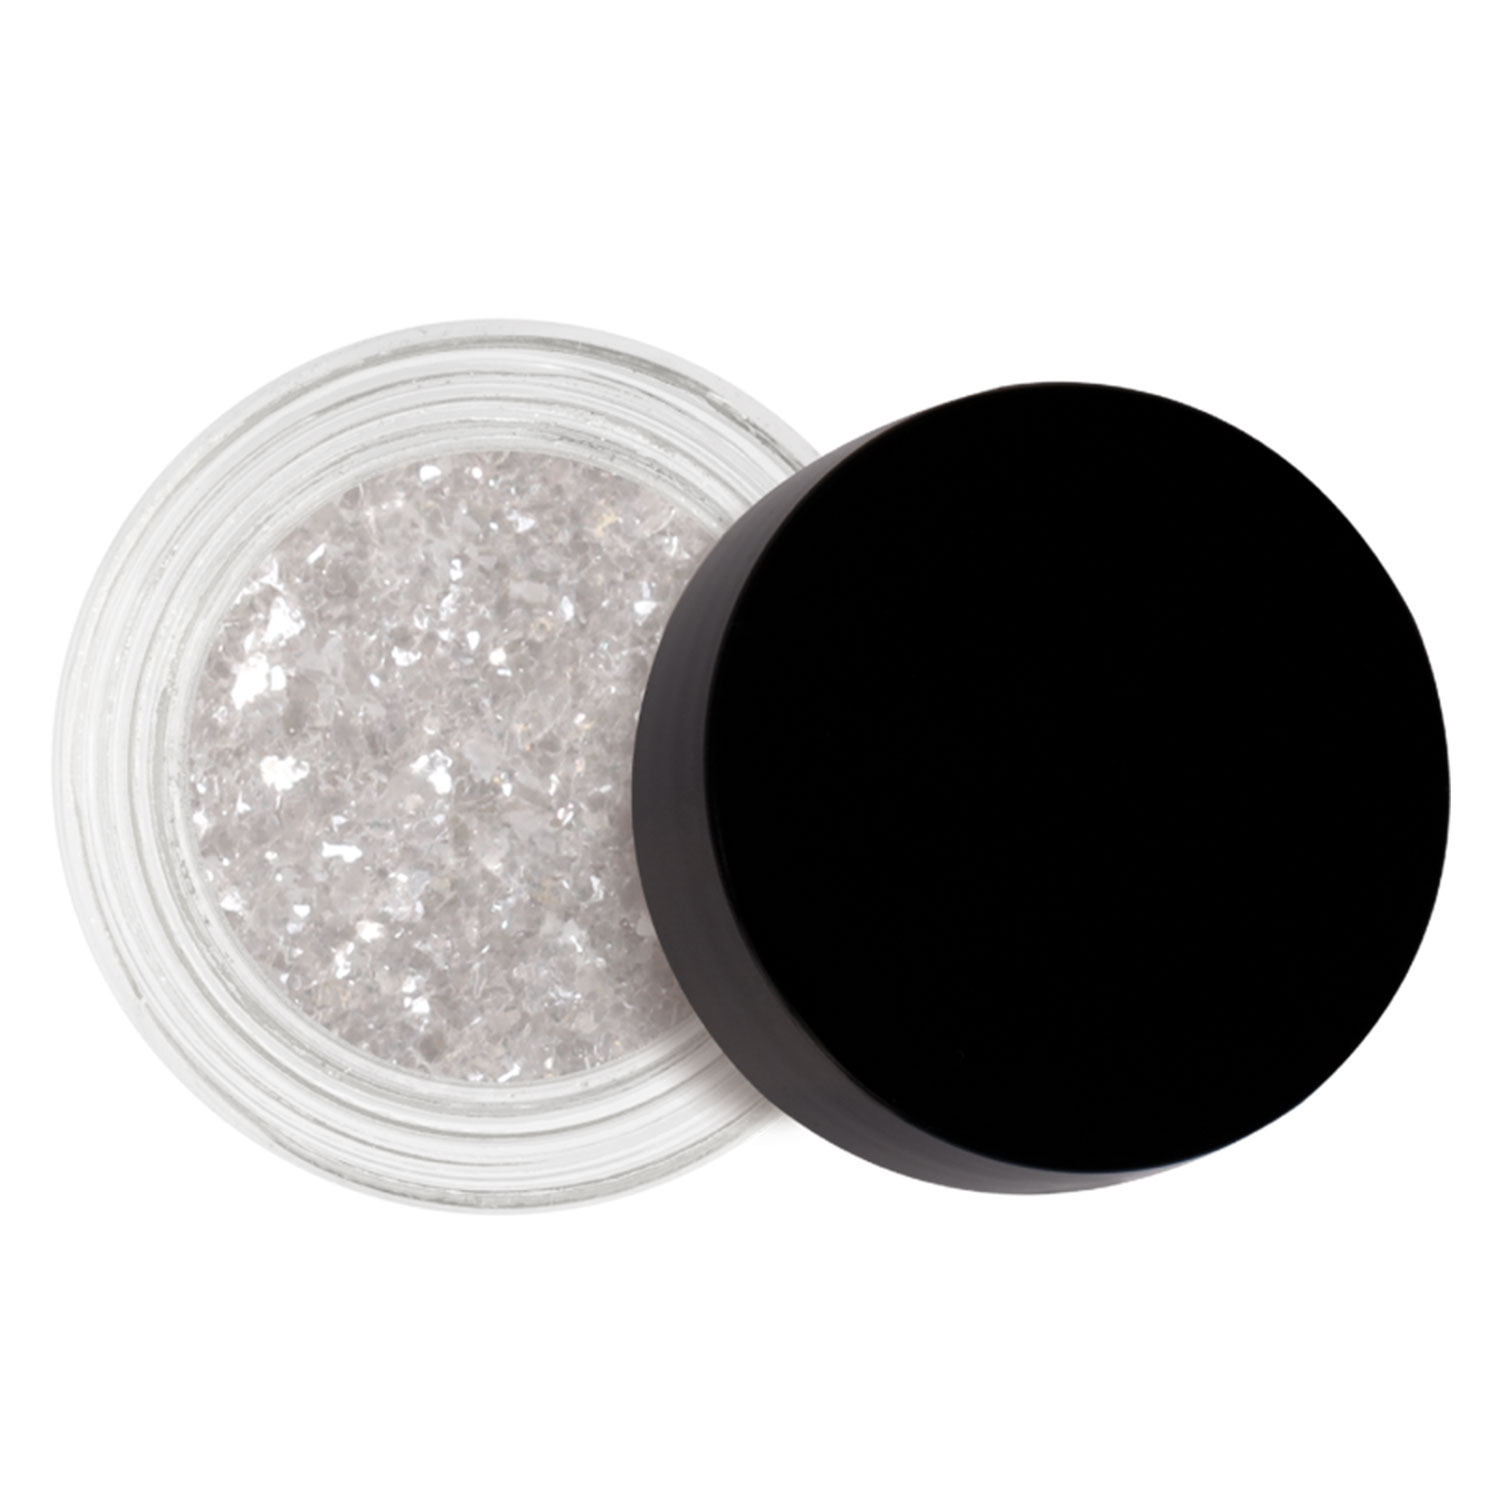 Inglot Body Sparkles Crystals, 1gm-105 Silver